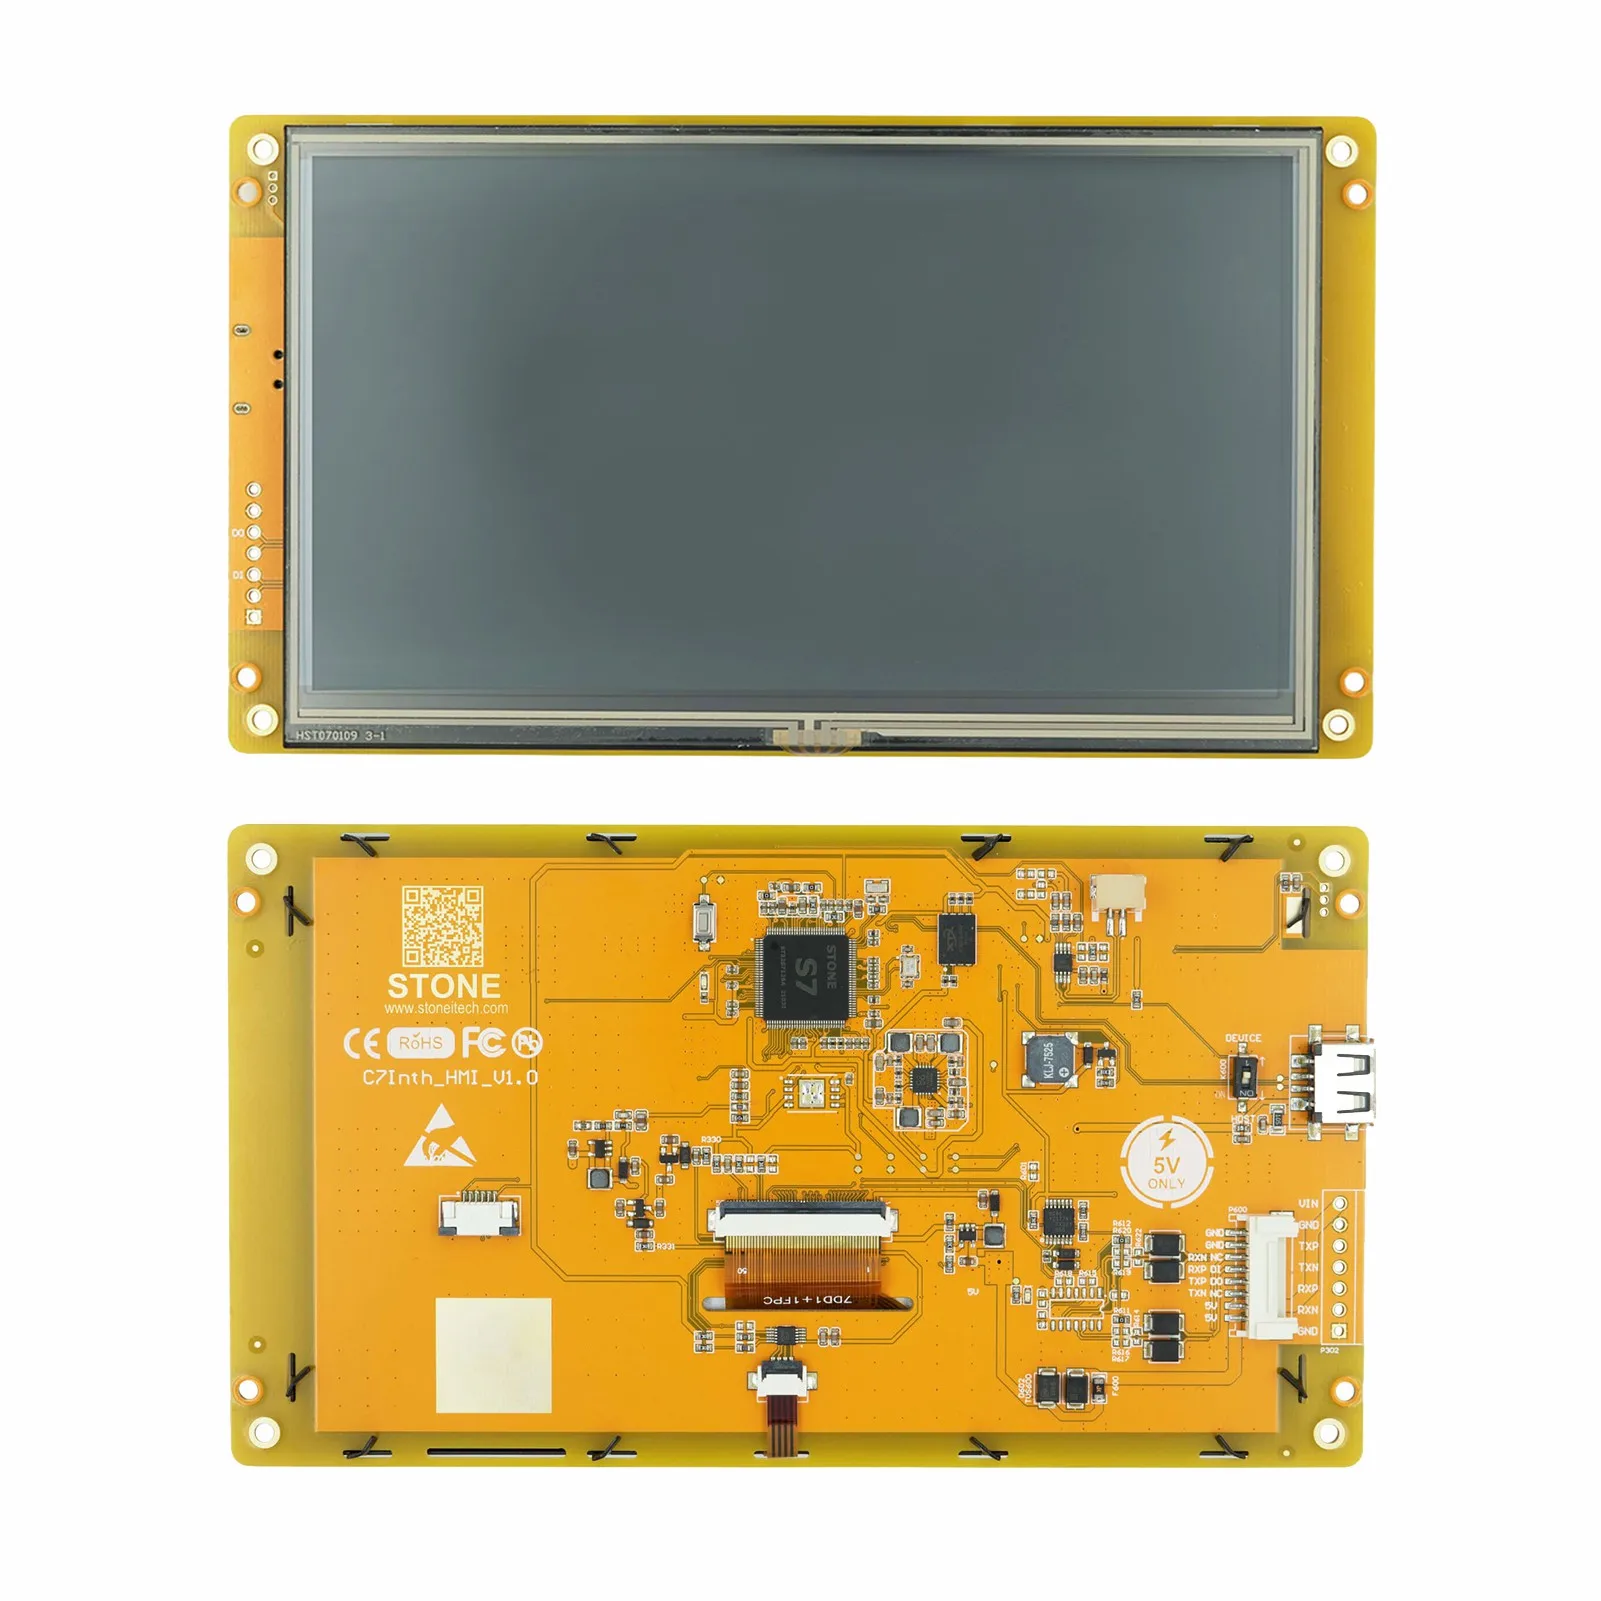 STONE 7 inch  Resistive Touch LCD Display Module with Touch Screen for Industrial Use